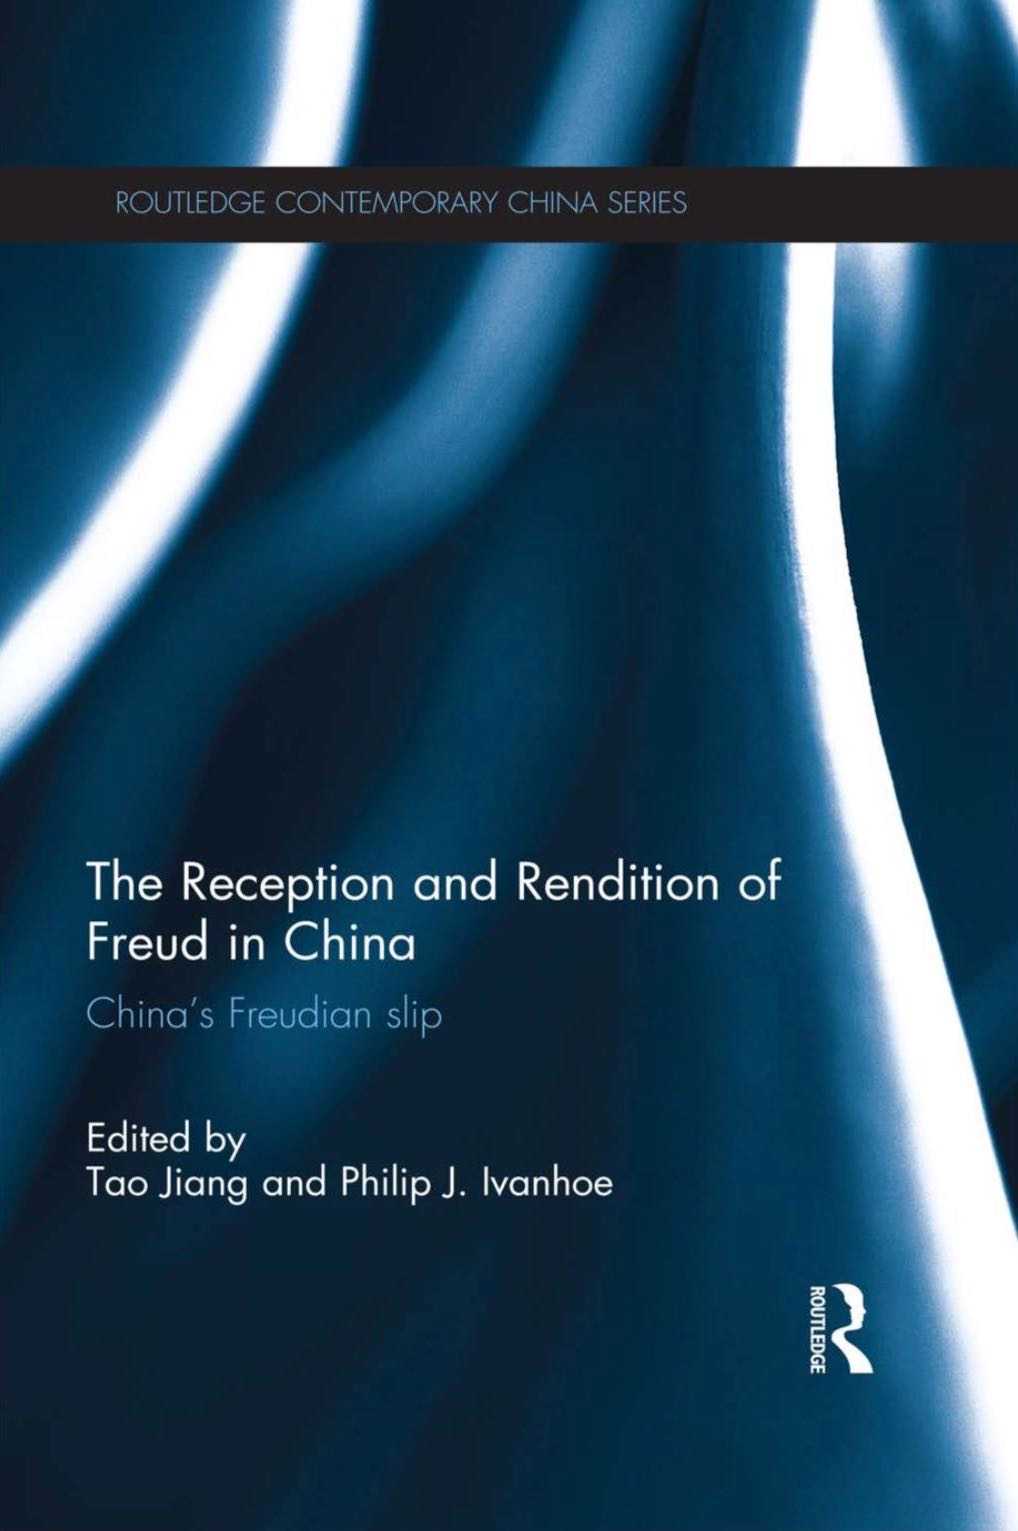 The Reception and Rendition of Freud in China: China’s Freudian Slip, edited by Tao Jiang and Philip J. Ivanhoe